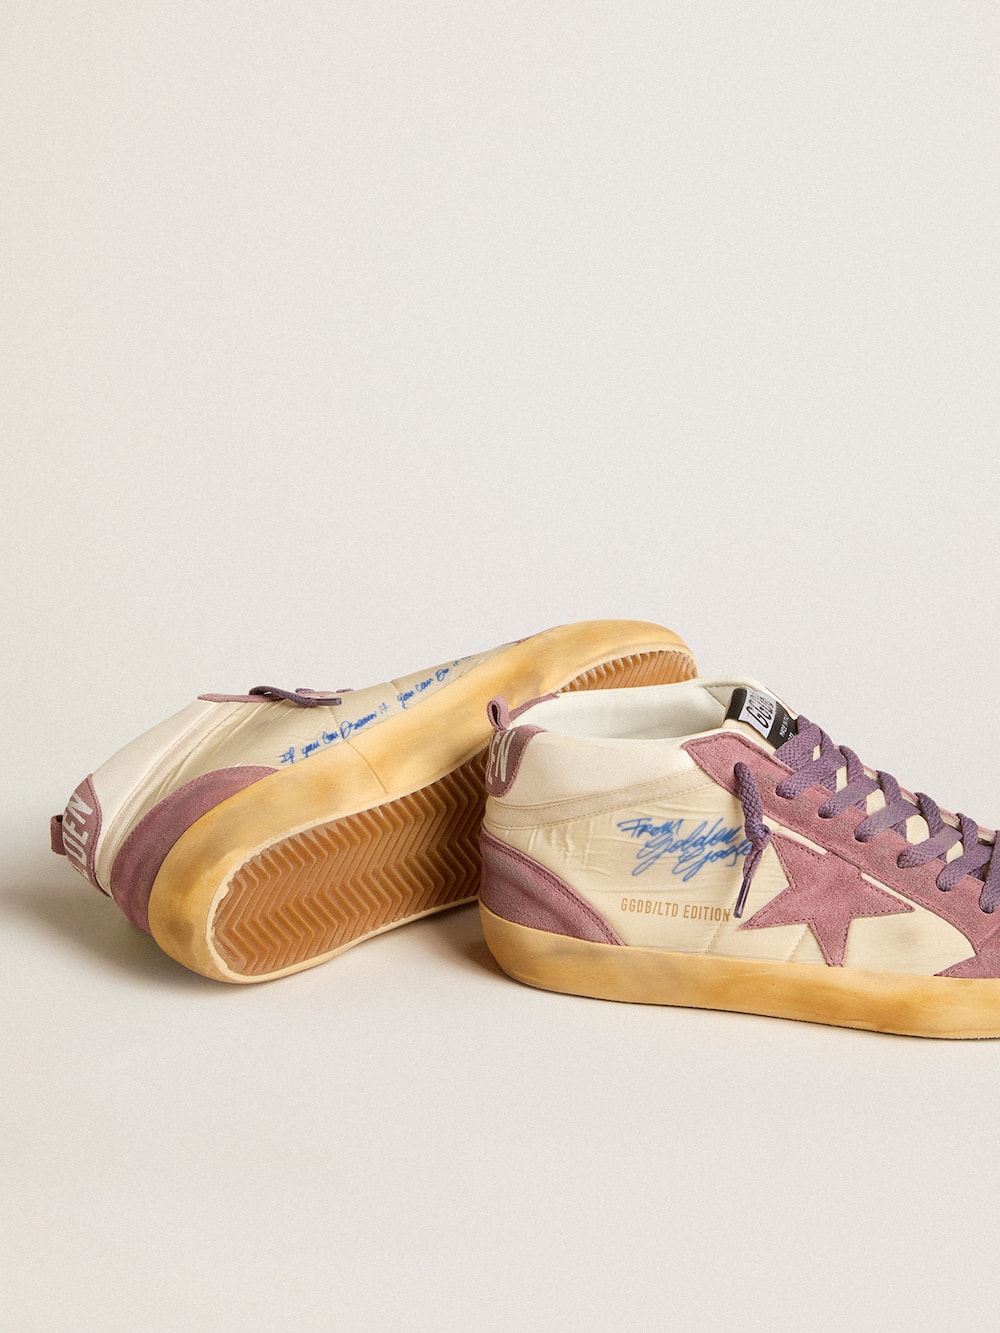 Golden Goose - Men’s Mid Star LAB in nylon and nappa with mauve suede star in 